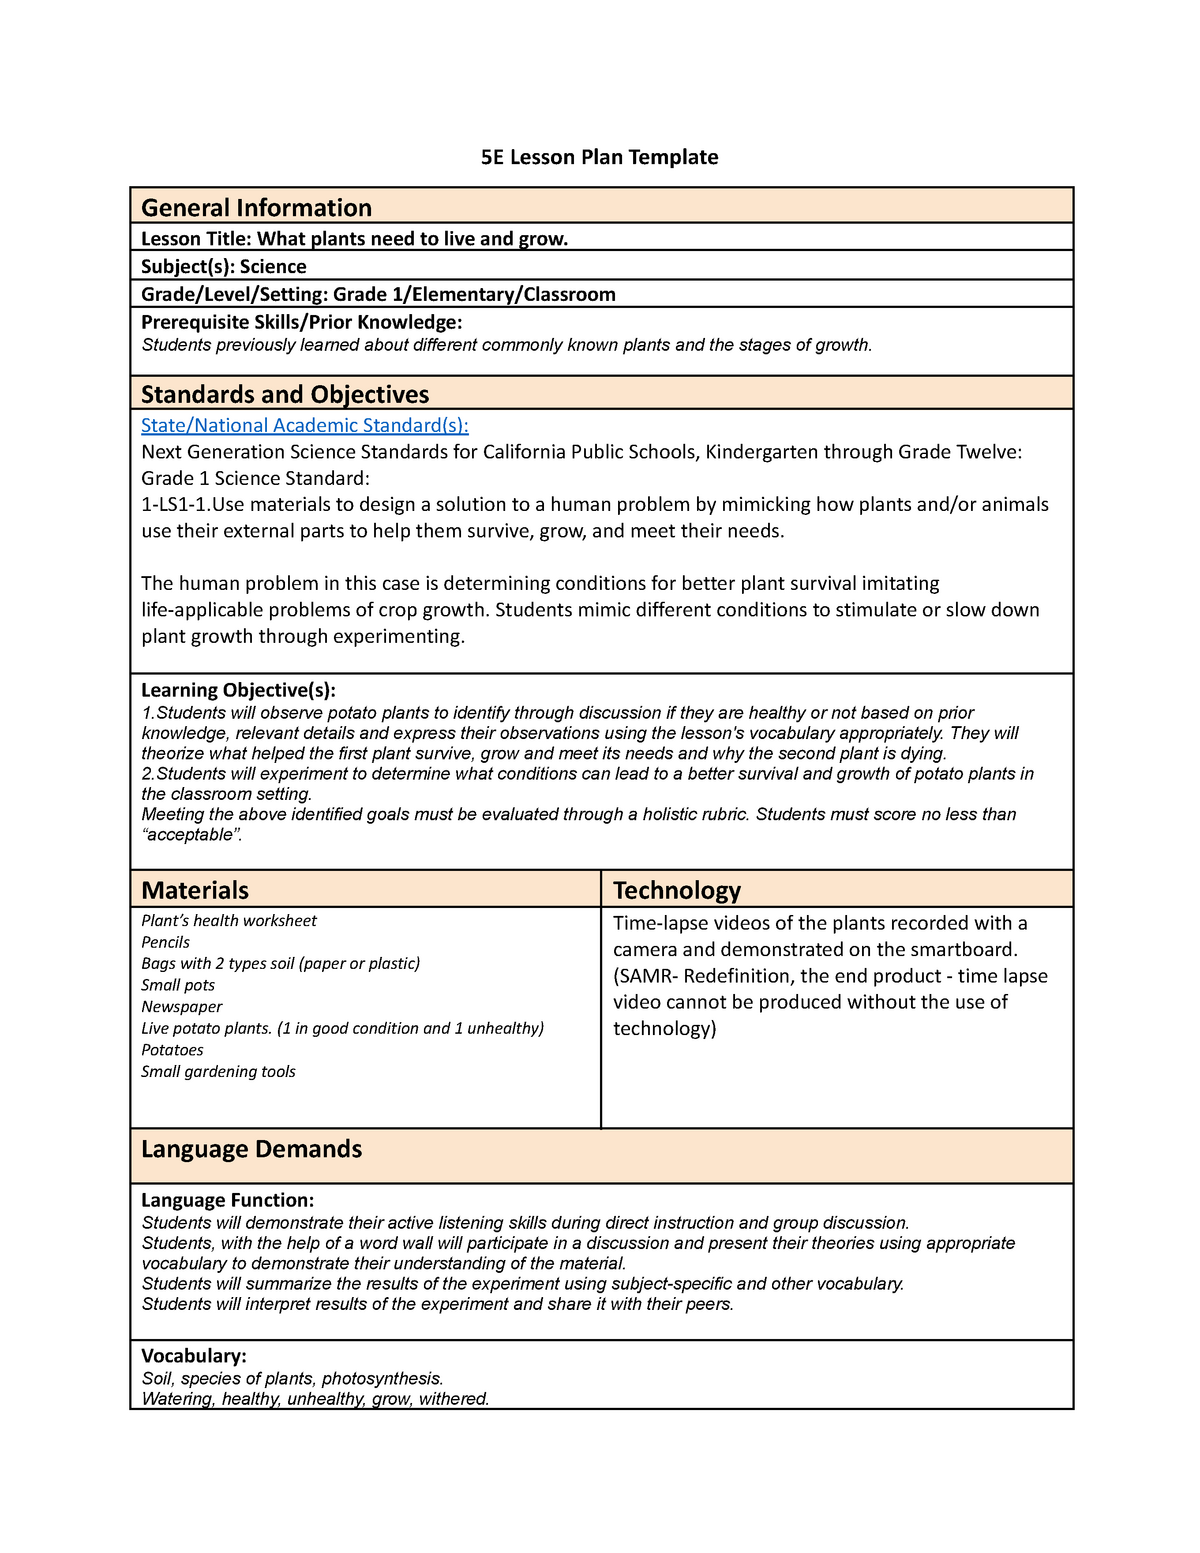 science-methods-task-5e-lesson-plan-template-general-information